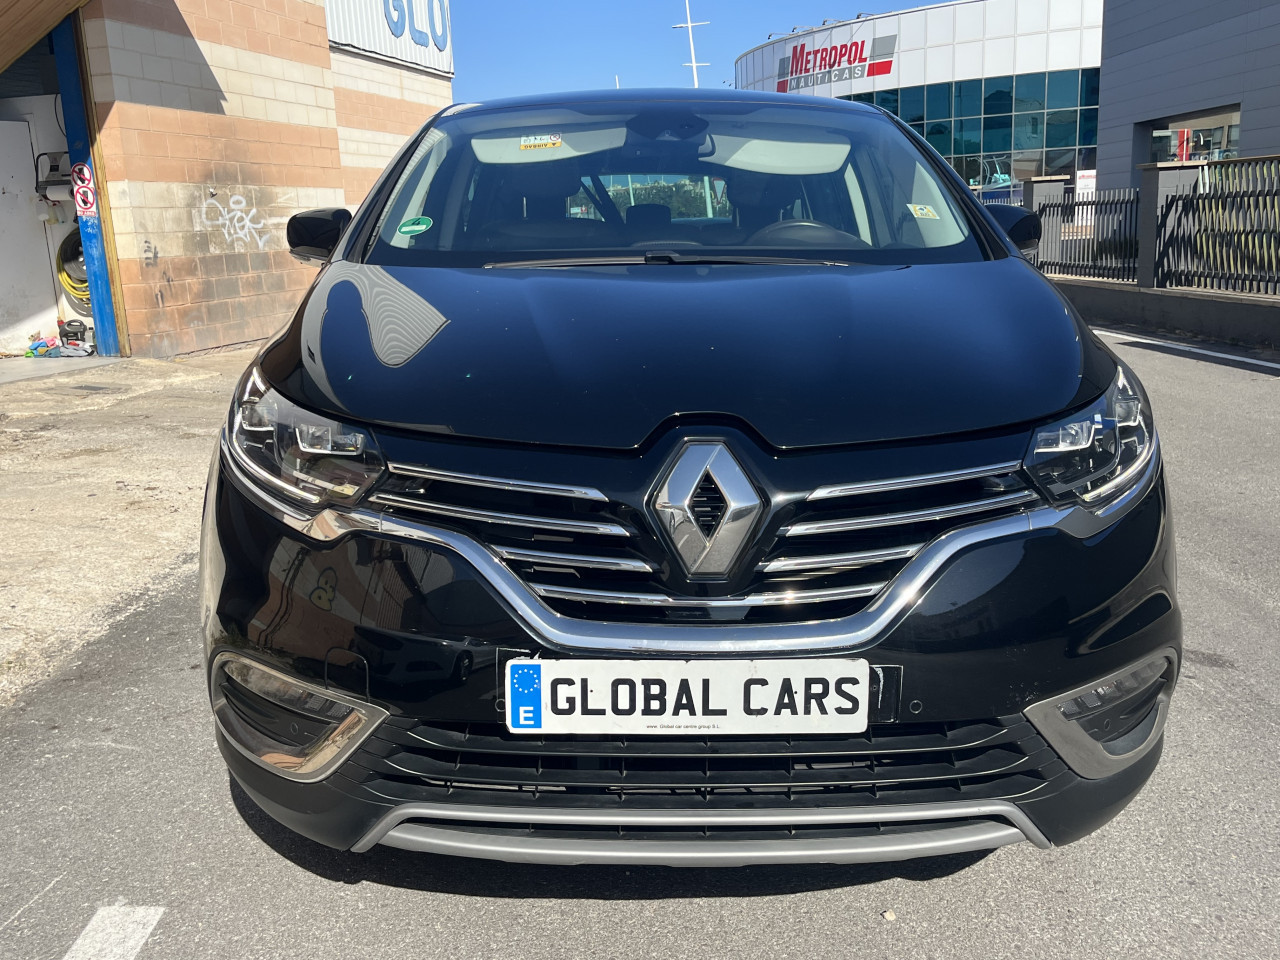 Renault Espace 1.6 Dci Intens Automatic People carrier